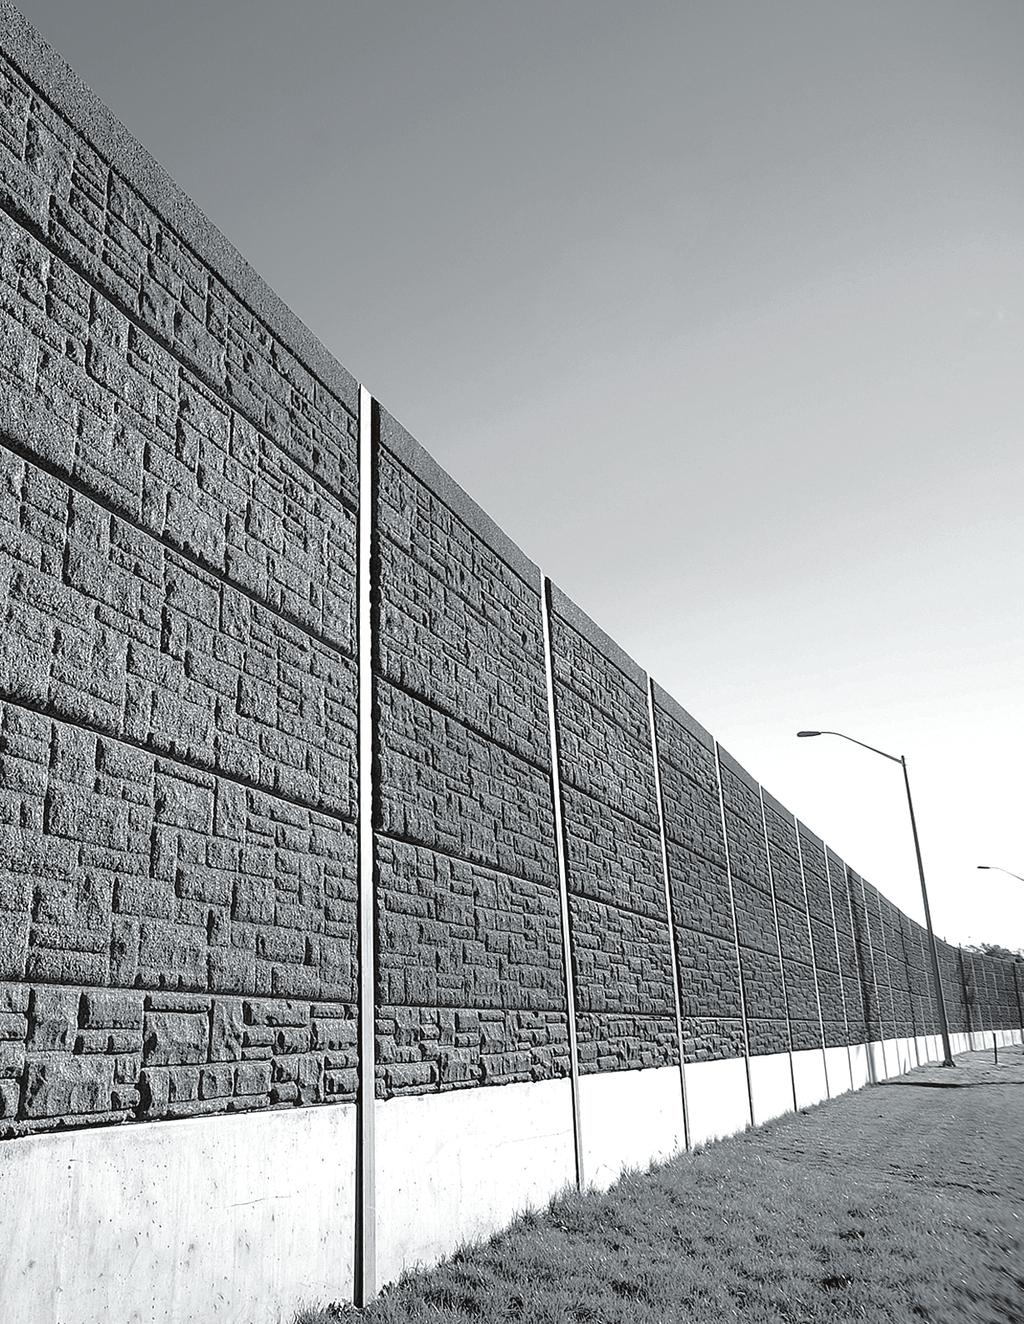 PROVIDING SOLUTIONS SINCE 1908 DURISOL PRECAST NOISE BARRIERS PRODUCT GUIDE ATTRACTIVE, SOUND-ABSORPTIVE WALLS MADE